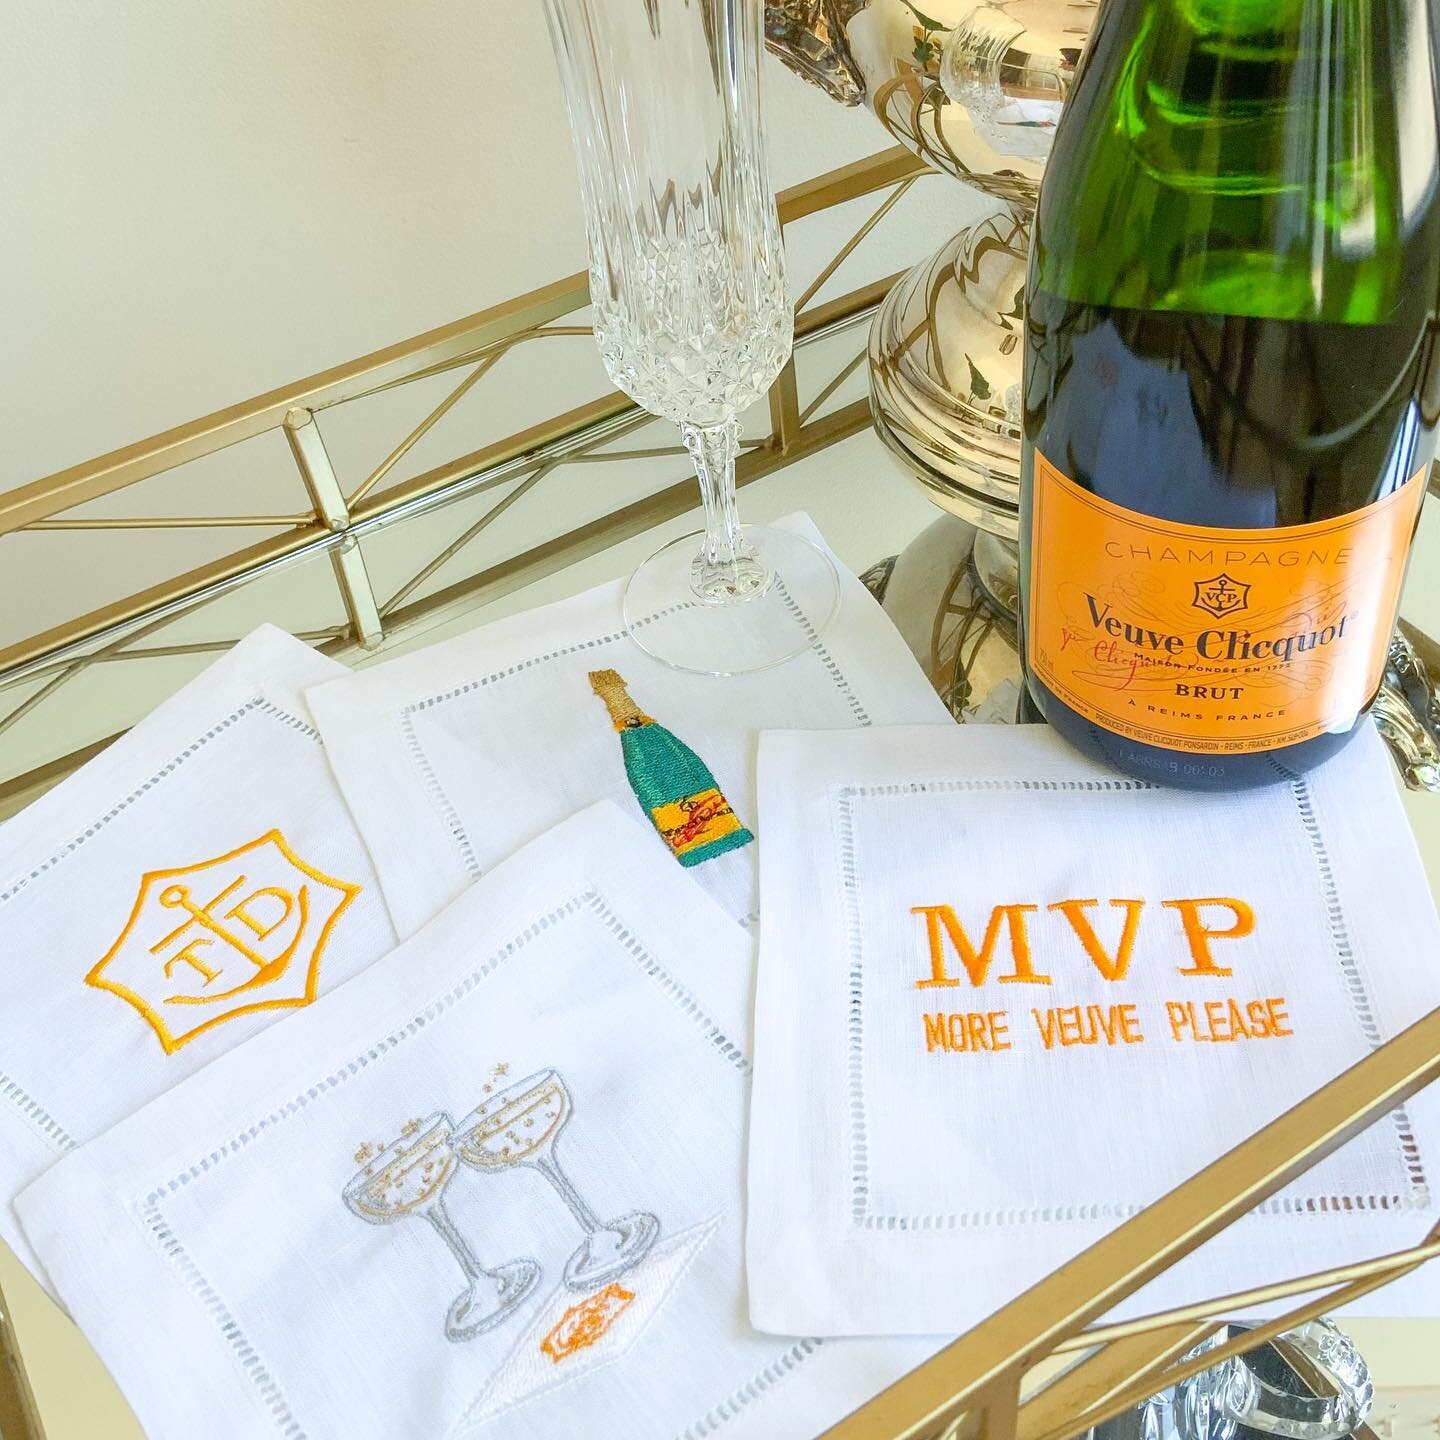 More Veuve Please! 🍾 Custom cocktail napkins make a fabulous gift! Order two sets - one for a gift and one for yourself! 🧡

#customembroiderystl #moreveuveplease #cocktailnapkins